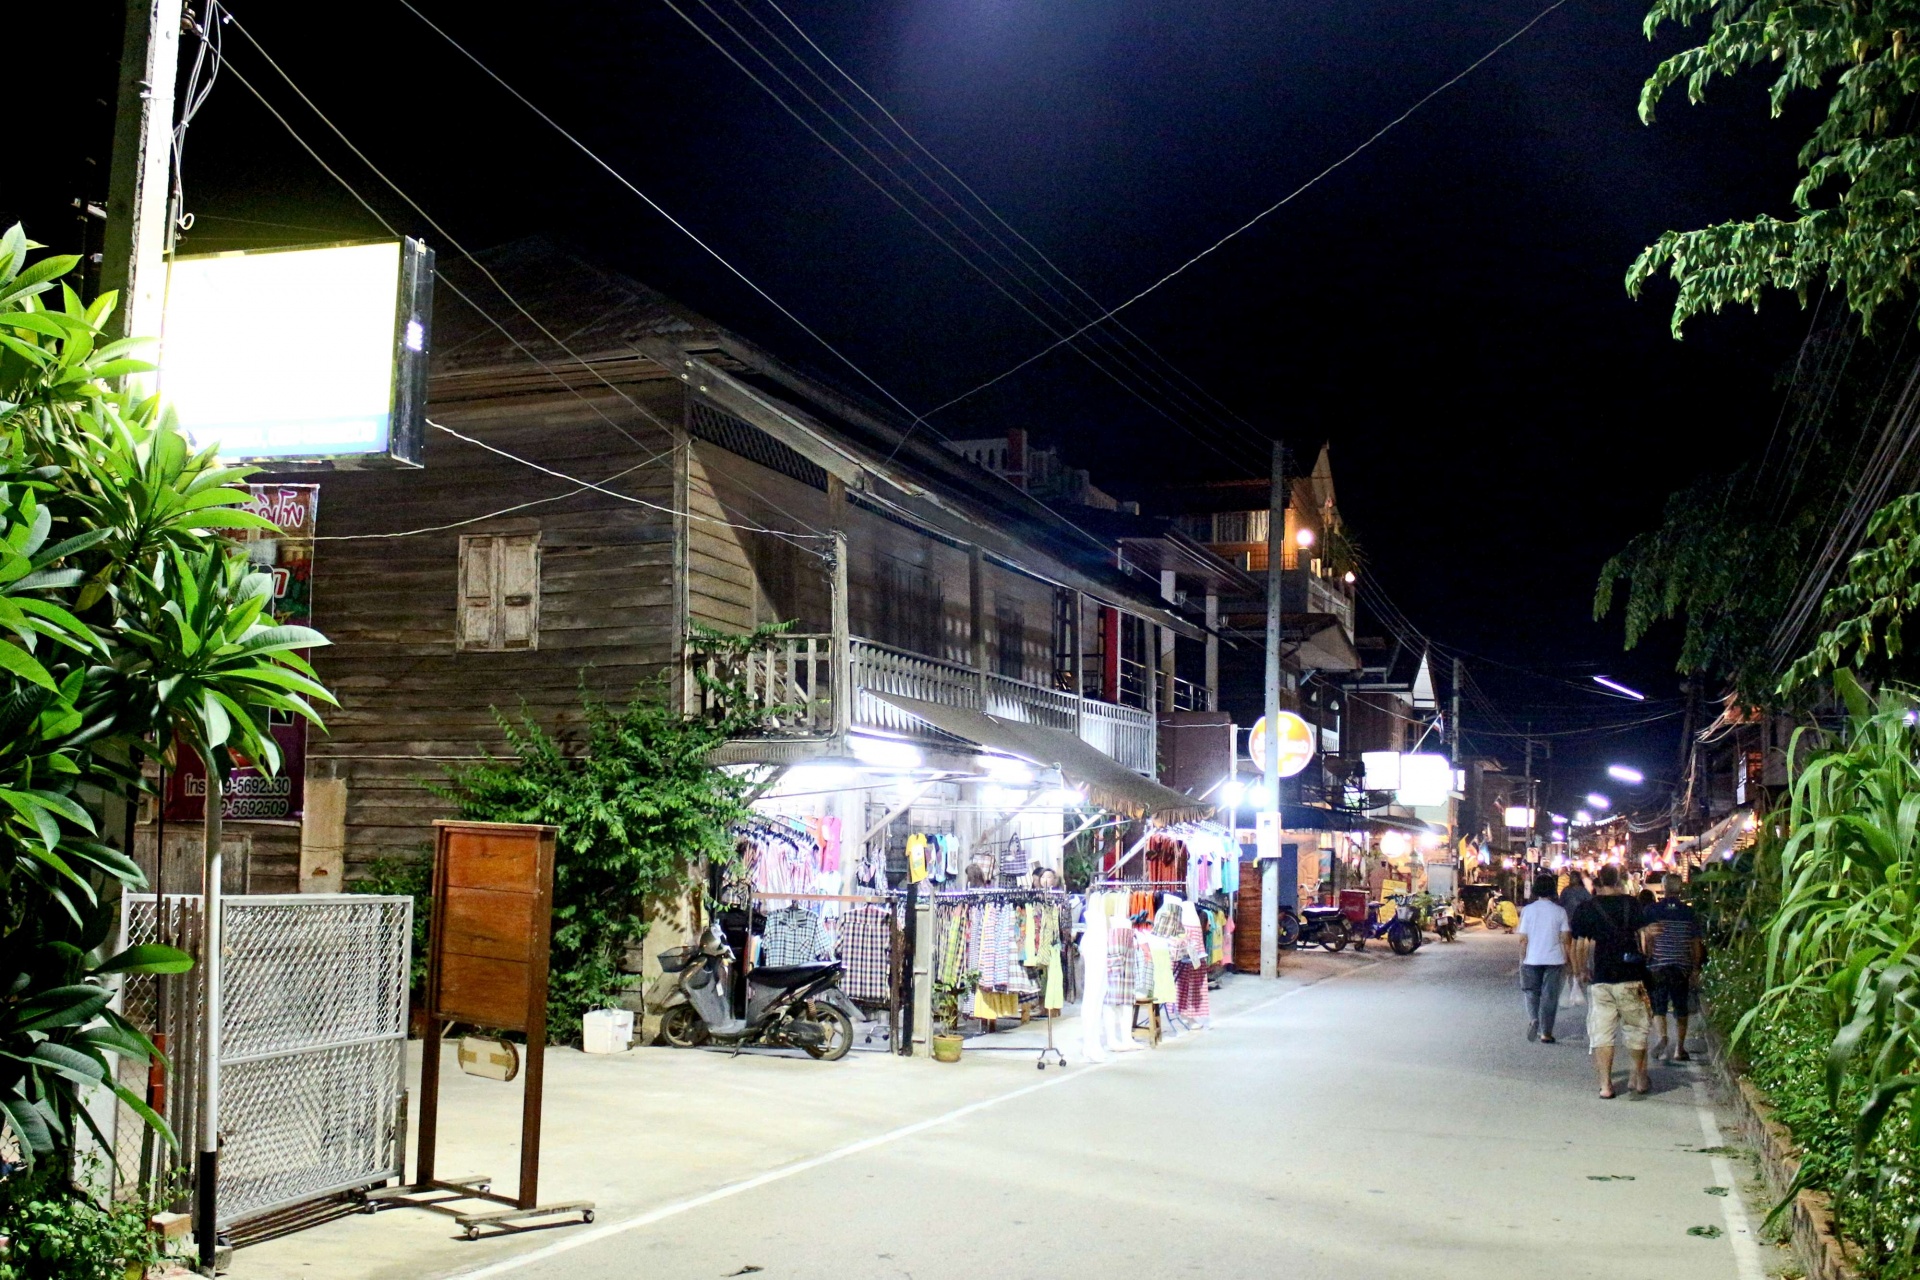 Editorial Use Only - CHIANG KHAN,LOEI